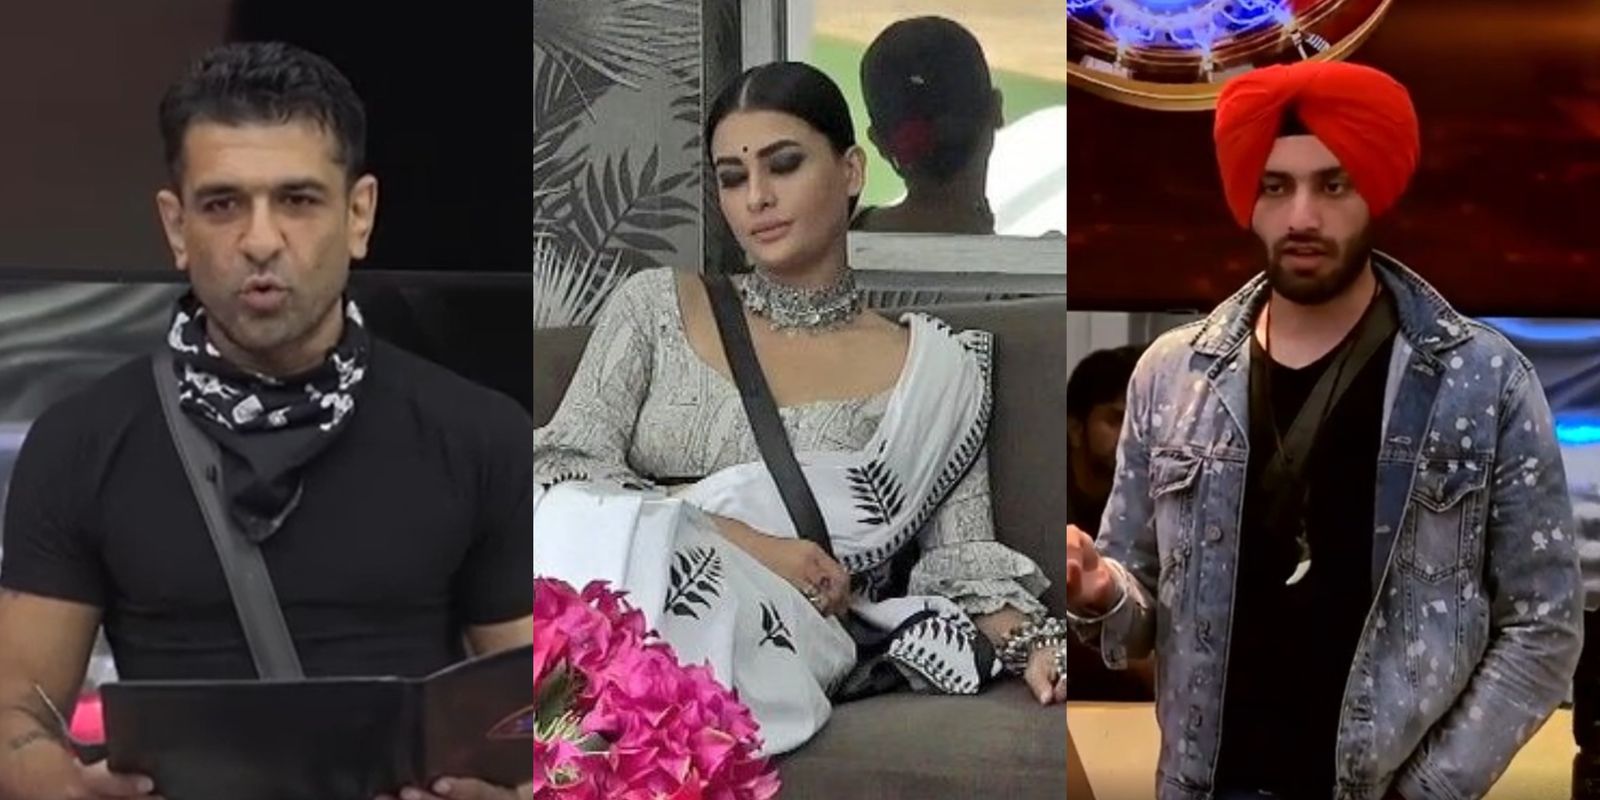 Bigg Boss 14: Eijaz, Pavitra And Shehzad To Leave The Show After Sidharth Shukla’s Team Loses A Task?